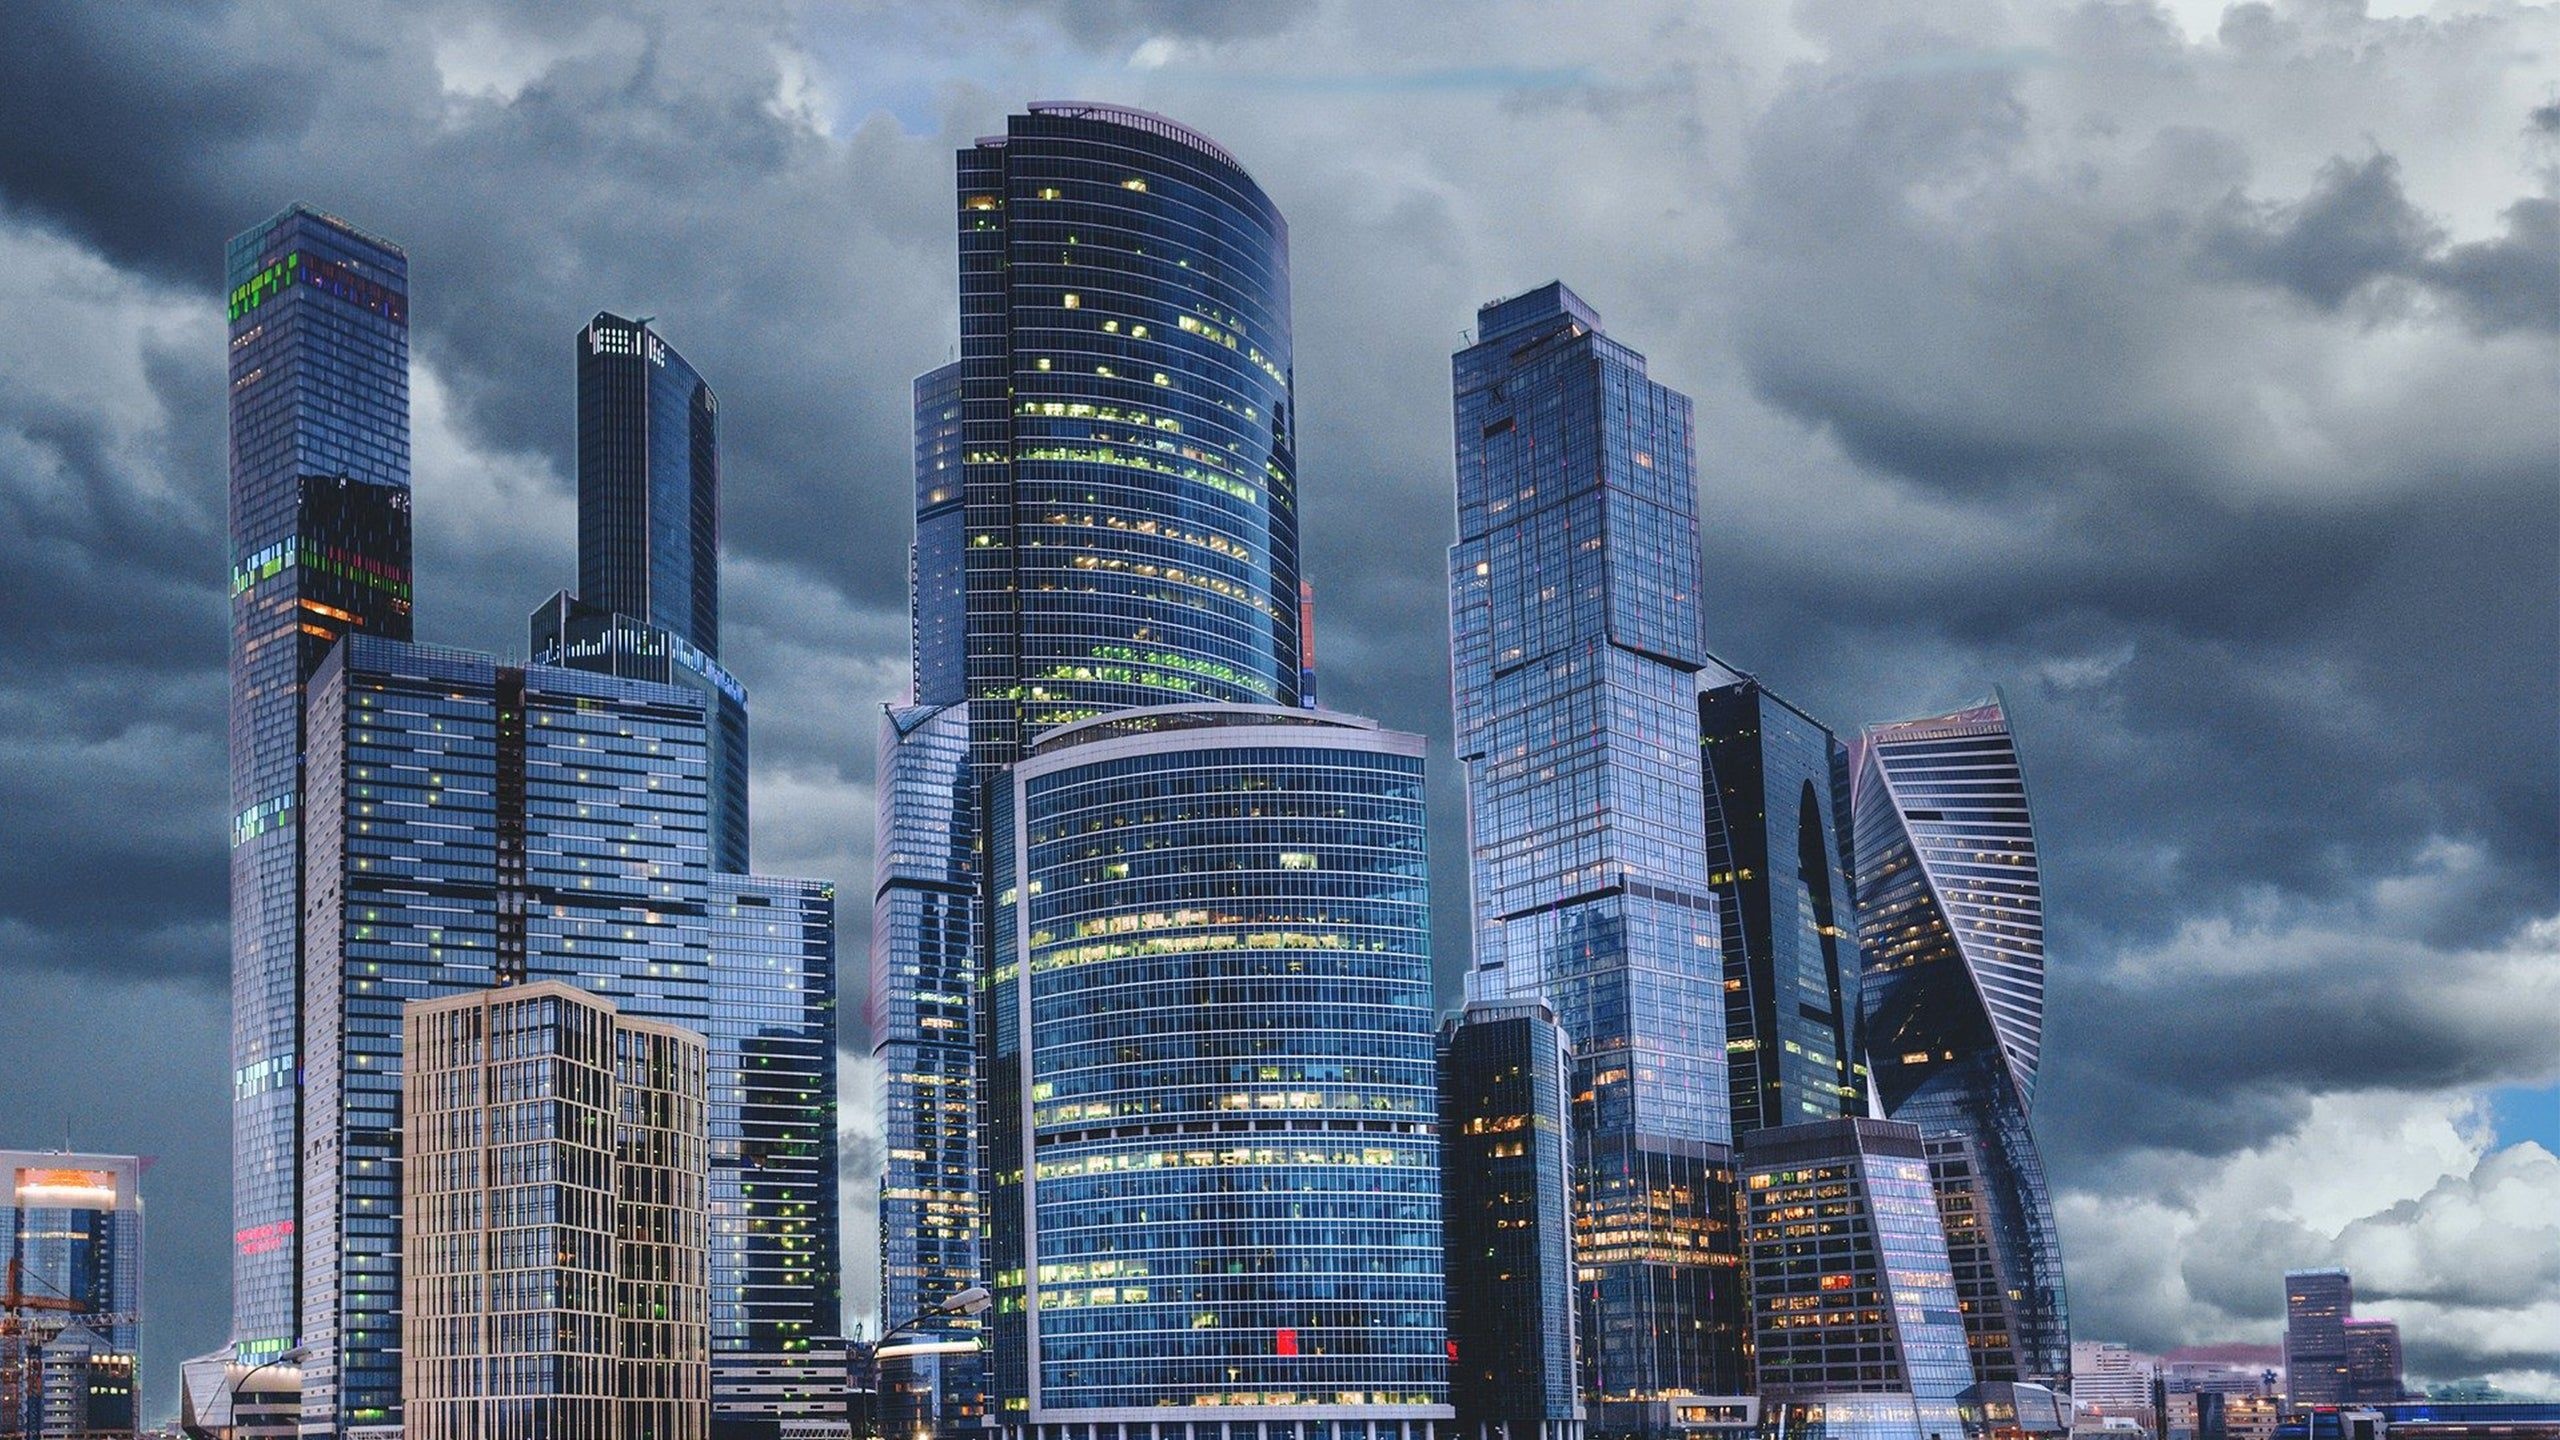 Moscow: Megalopolis, Russia, Street Architecture, The International Business Center. 2560x1440 HD Wallpaper.